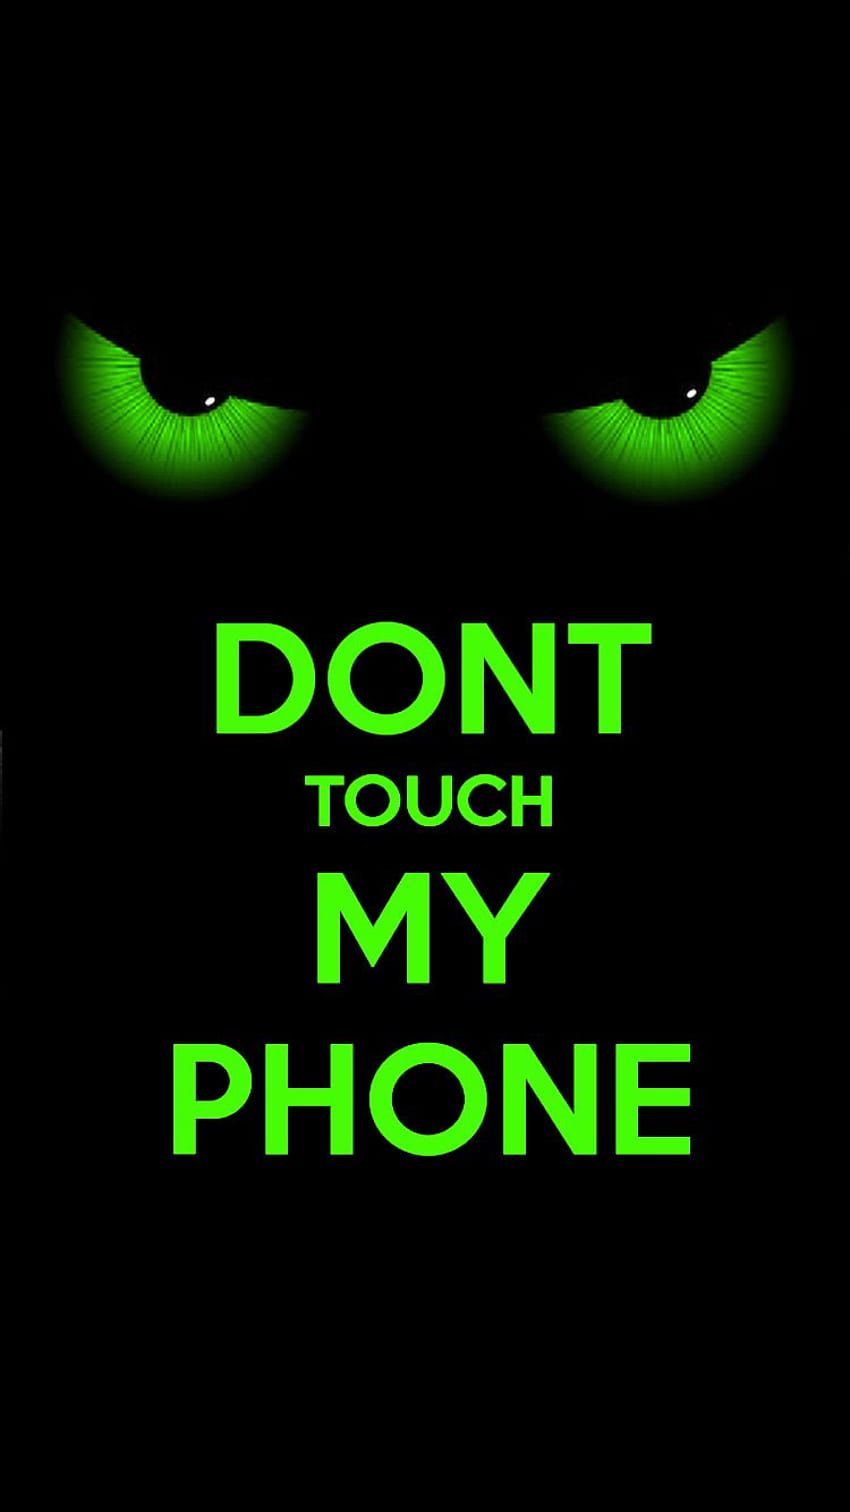 Dont Touch Me posted by Christopher Peltier HD phone wallpaper